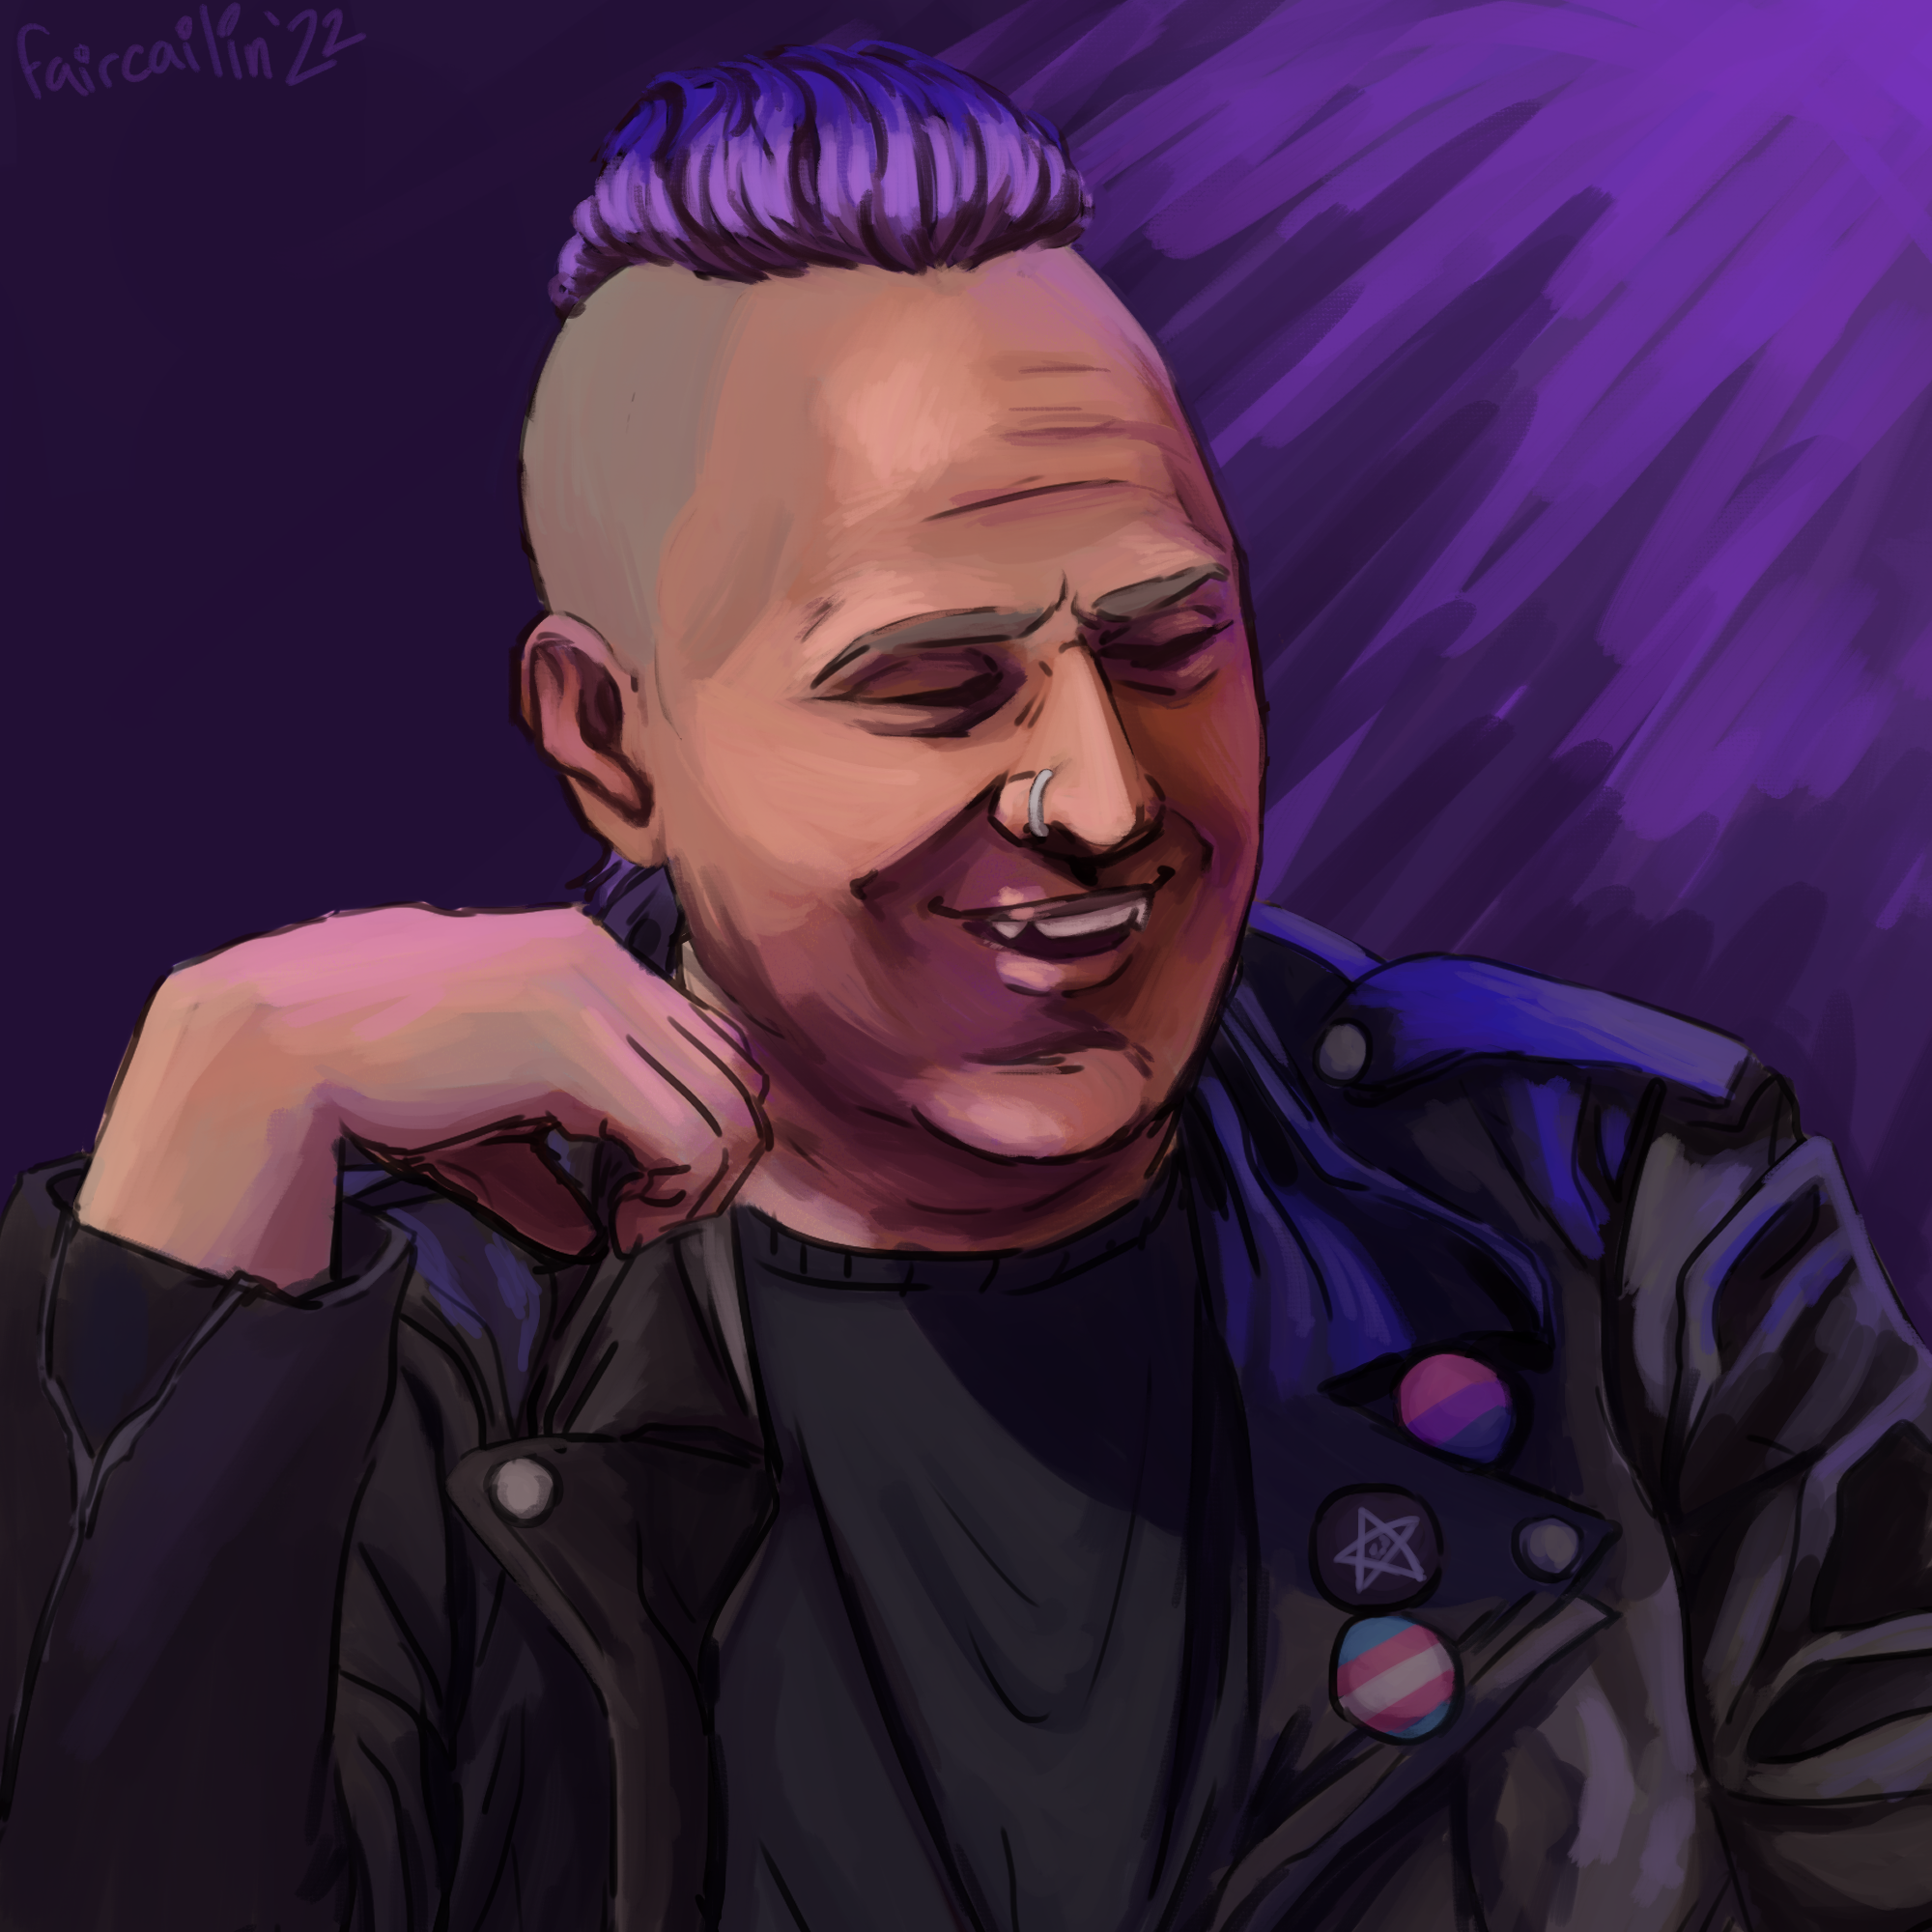 A messy portrait of Carver from LA by Night. He's a middle-aged white vampire with a slicked-back purple mohawk, and a silver nose piercing. He's wearing a black t-shirt and a leather motorcycle jacket with a few buttons on it. He's smiling and has his hand up, like when someone makes an UwU face.